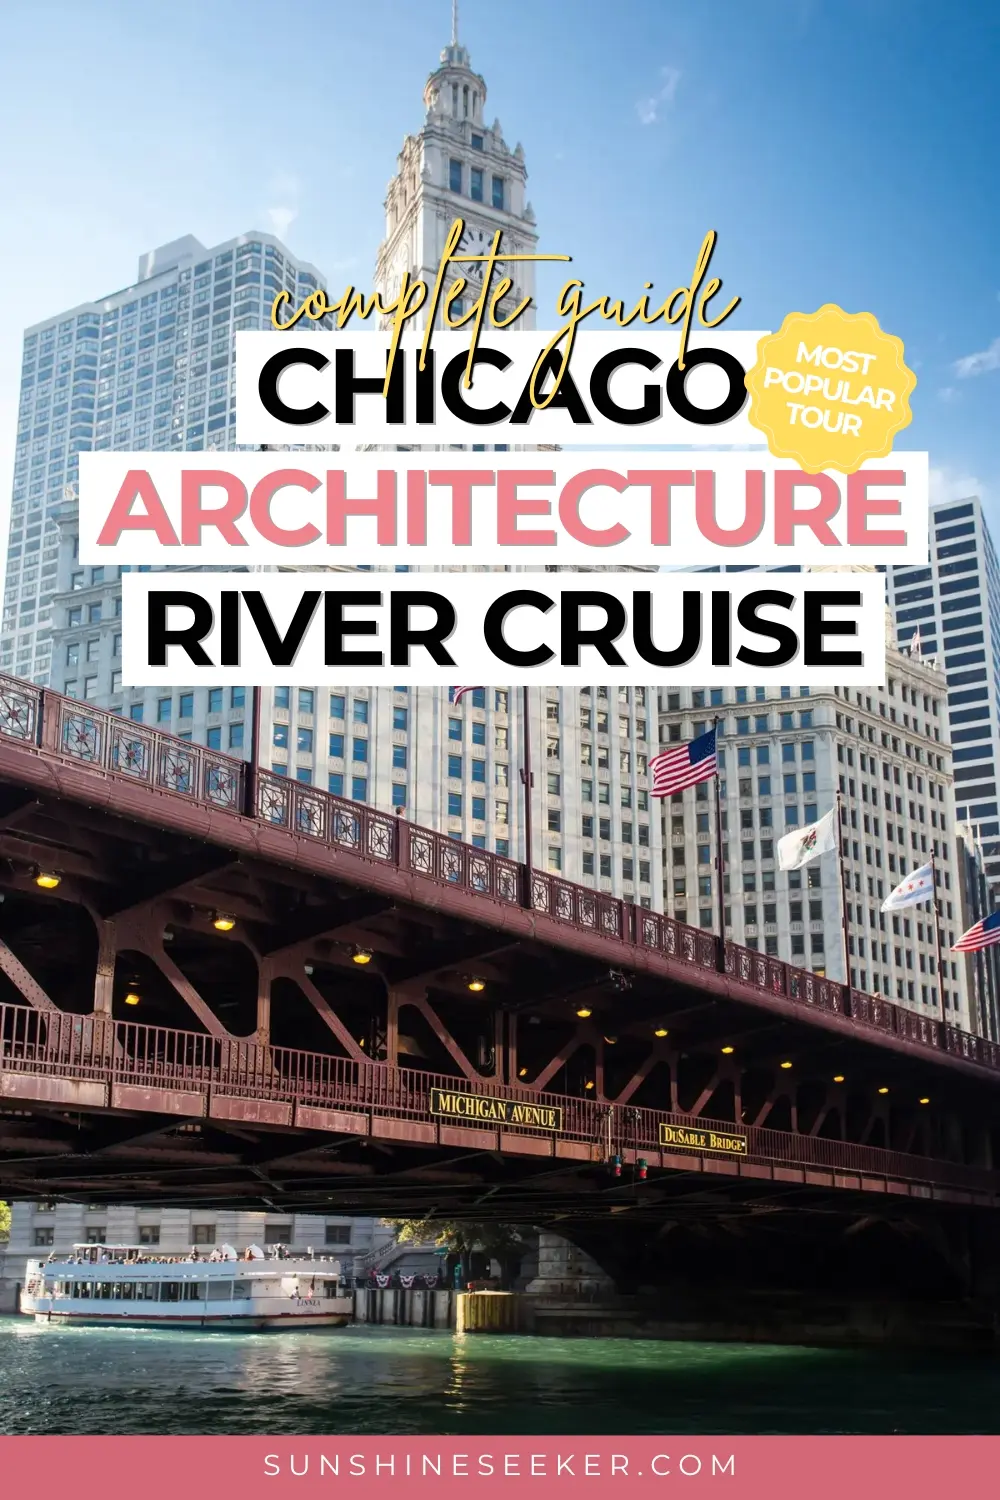 Don't miss this architectural river cruise while in Chicago. It was my favorite tour in Chicago. Learn about the Windy City's beautiful architecture and see it all from a unique perspective. Best Chicago tour. Best Chicago River Cruise.